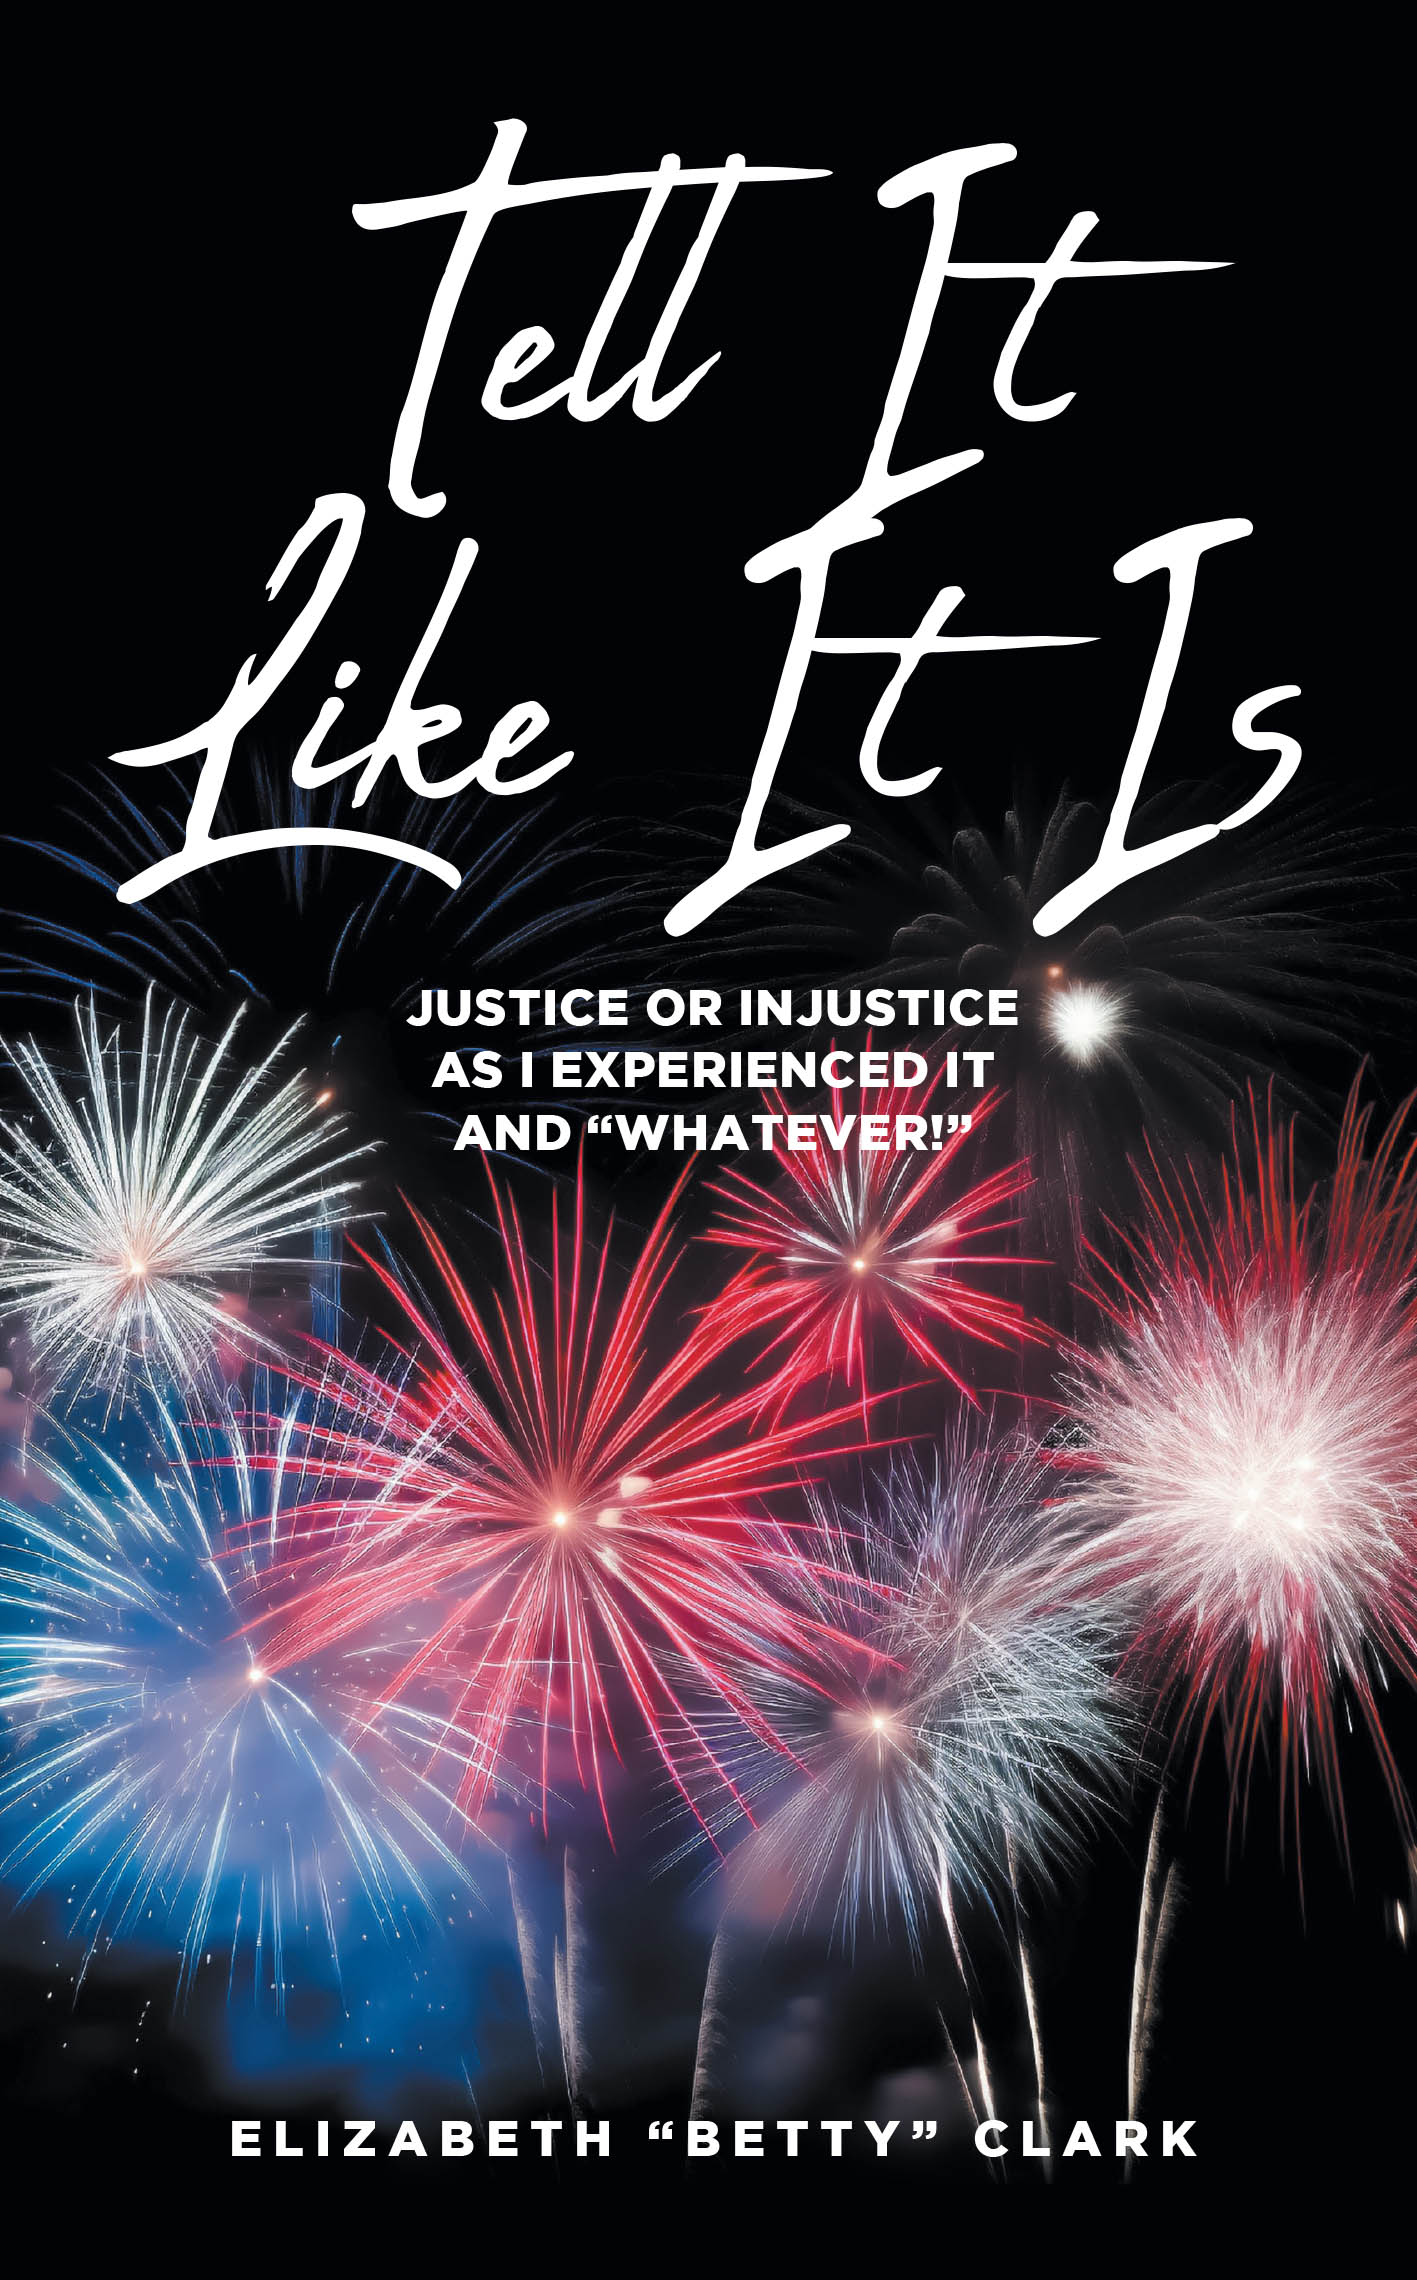 Elizabeth "Betty" Clark’s New Book, “Tell It Like It Is: Justice or Injustice as I Experienced It and ‘Whatever!’” is a Bold and Thought-Provoking Memoir